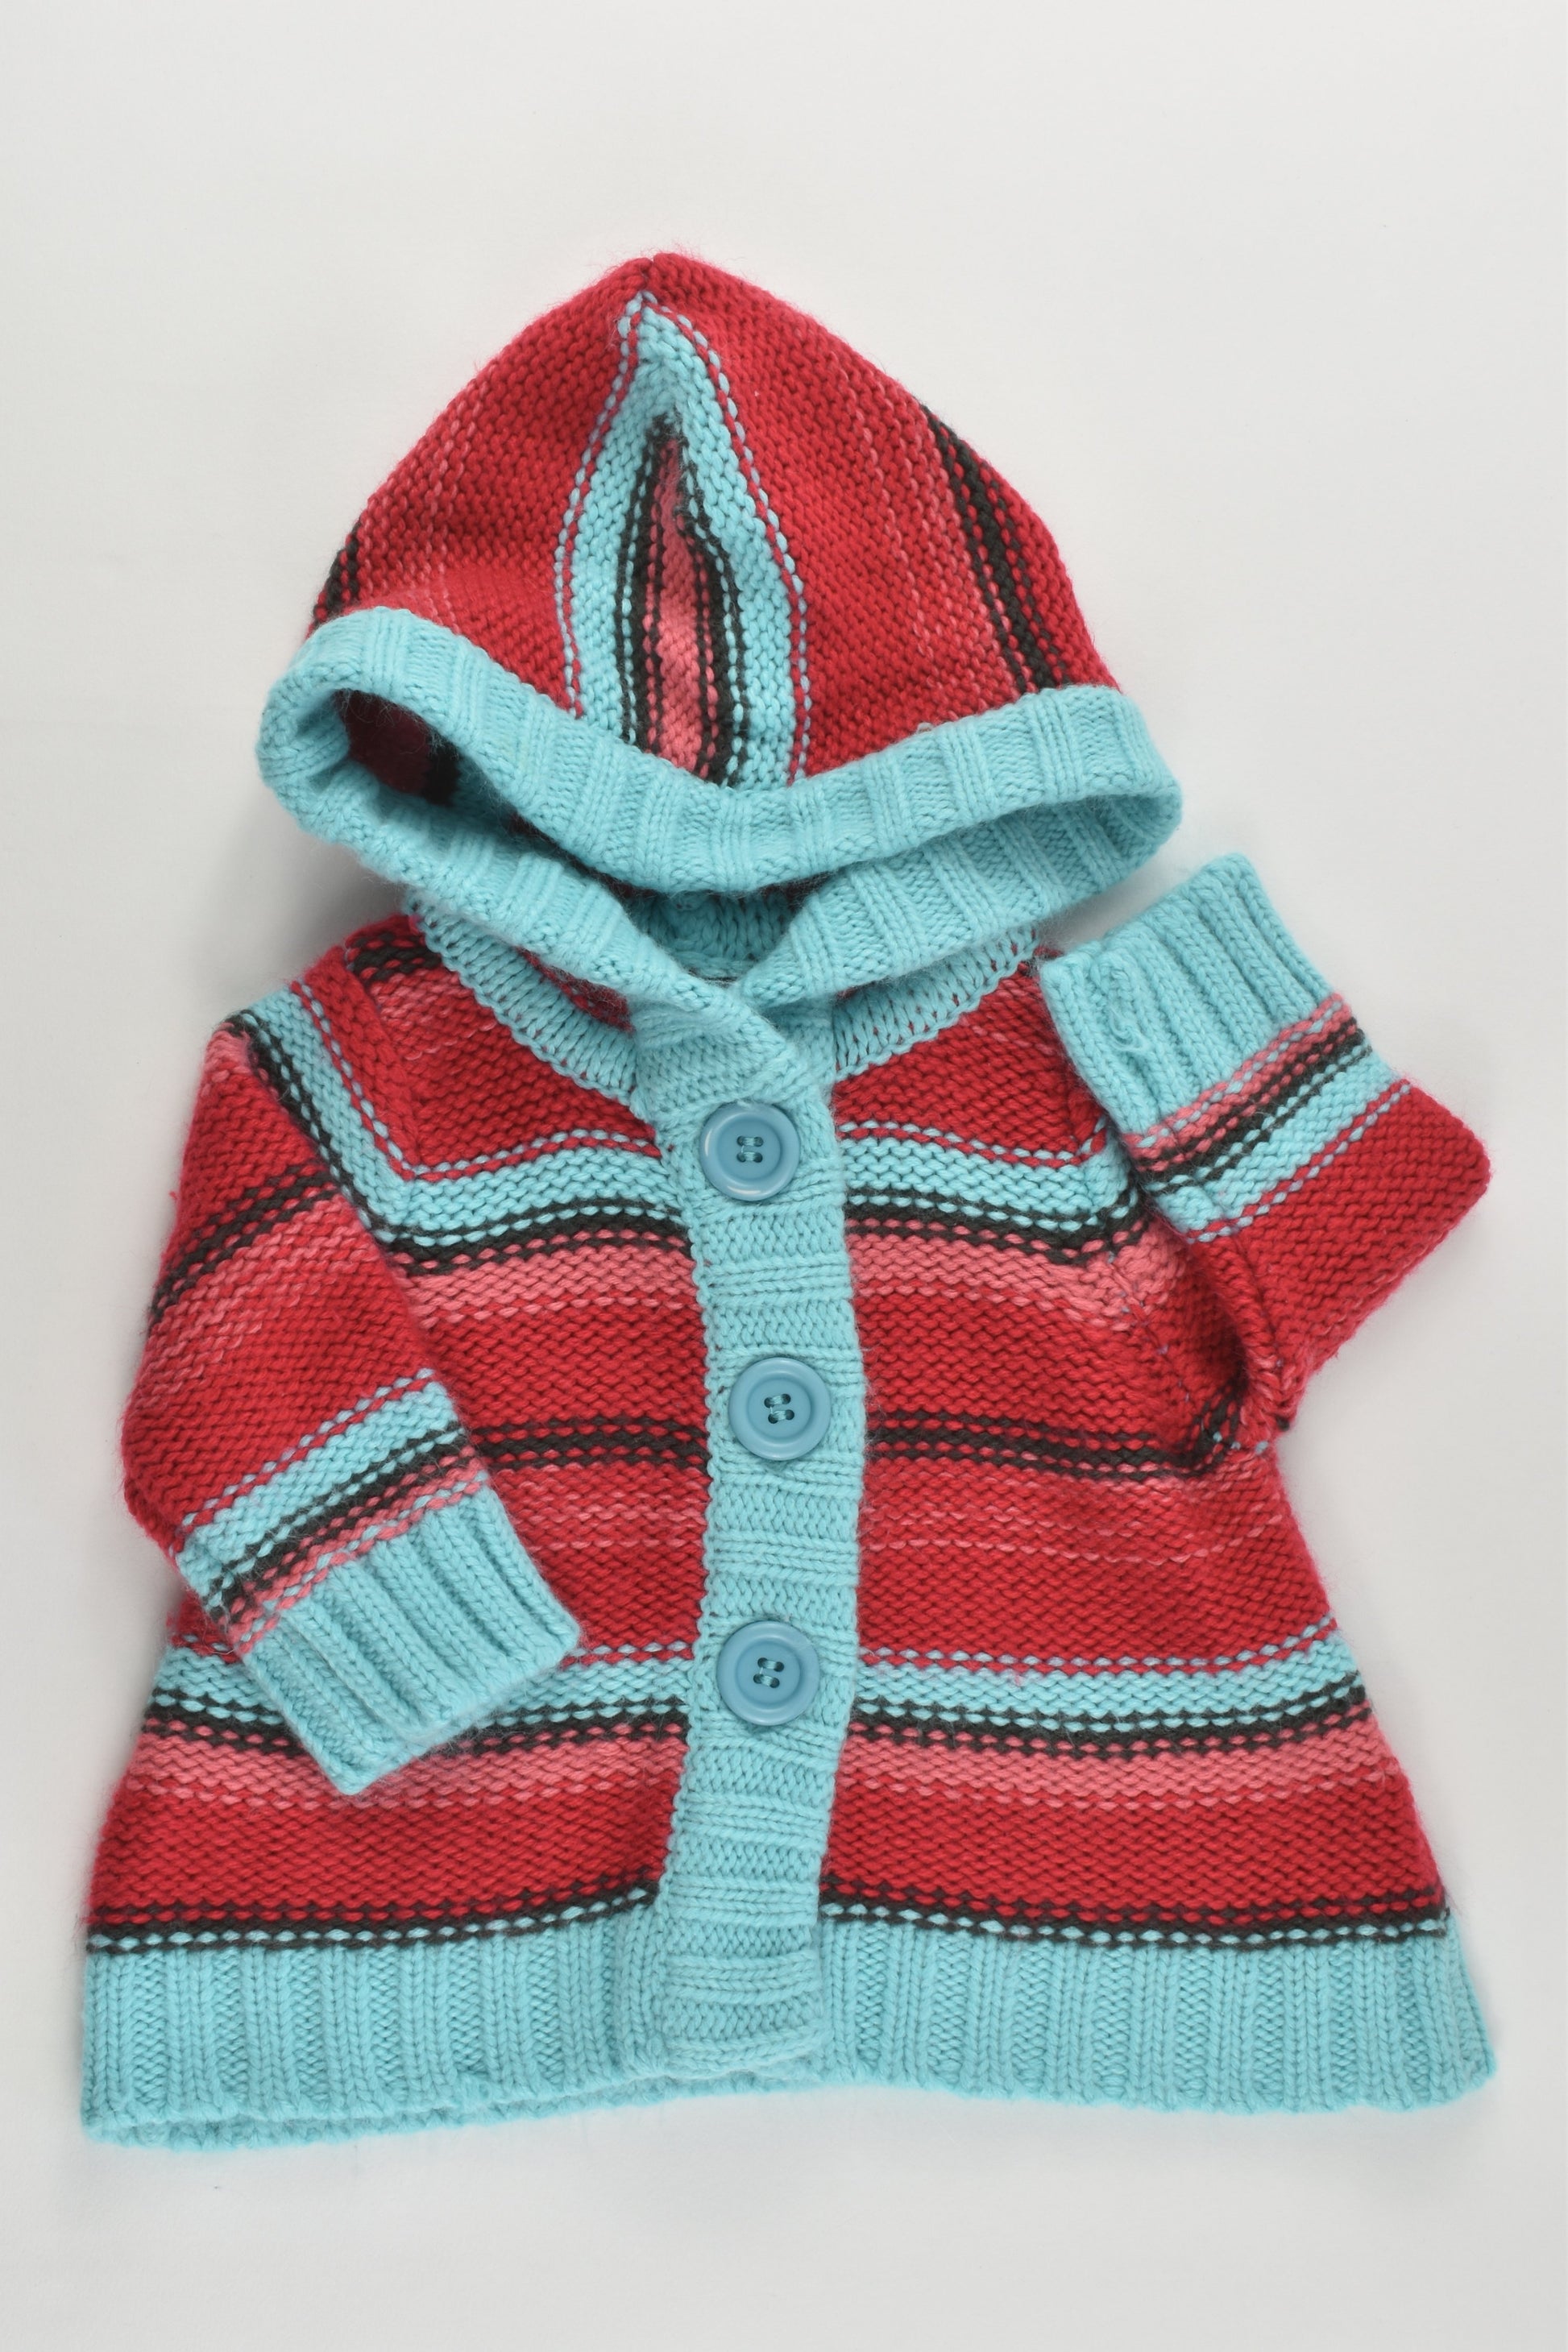 Pumpkin Patch Size 000 (56 cm) Knitted Striped Hooded Jumper